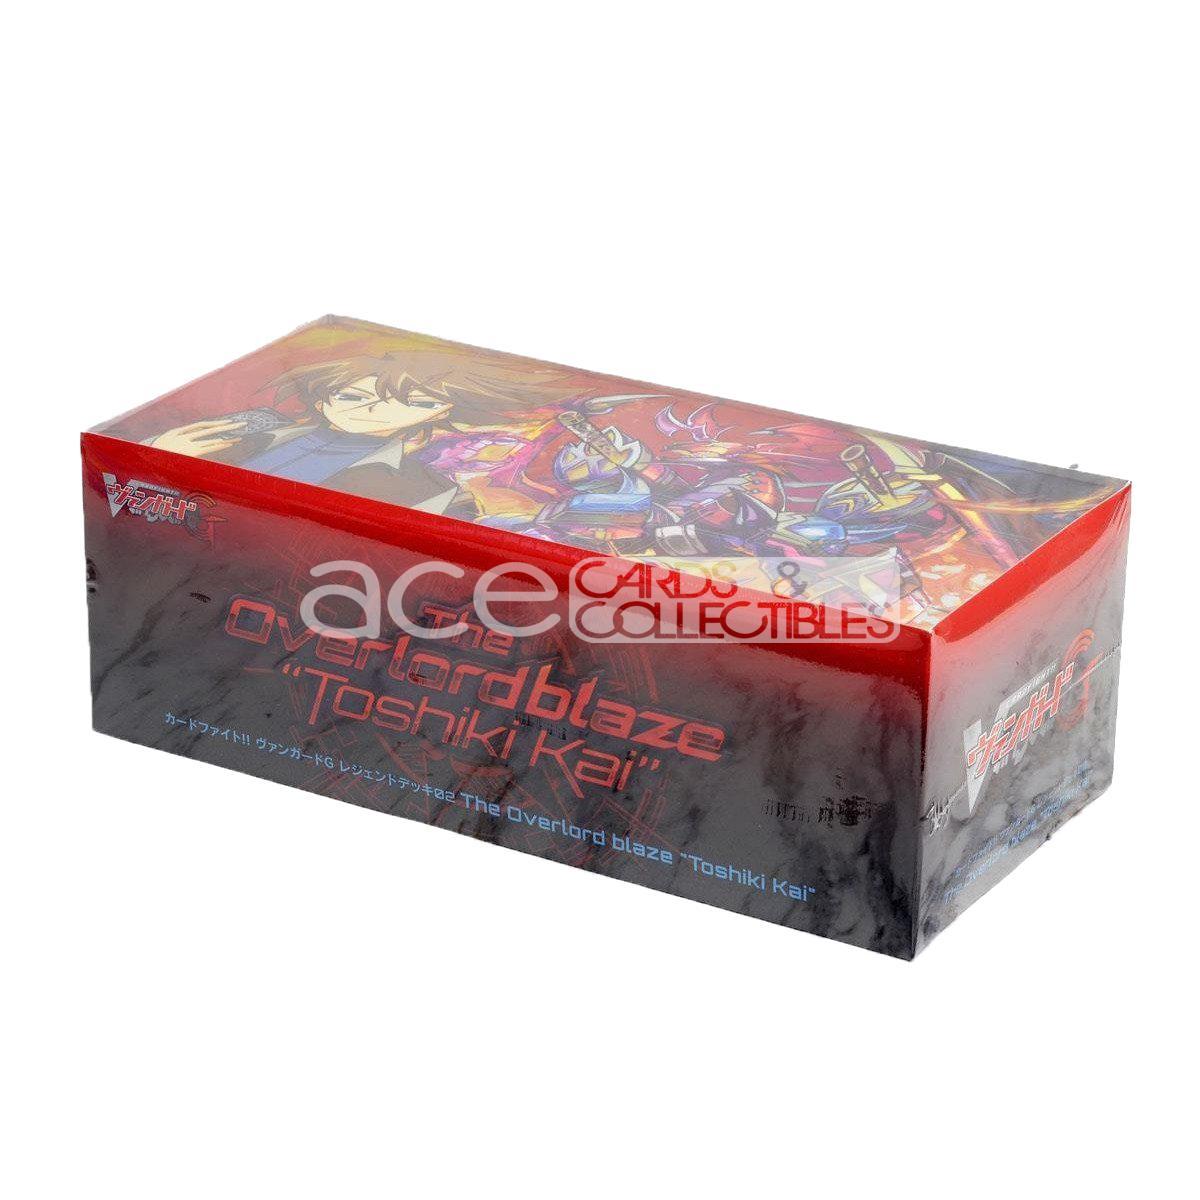 Cardfight Vanguard G The Overlord blaze "Toshiki Kai" [VG-G-LD02] (Japanese)-Bushiroad-Ace Cards & Collectibles